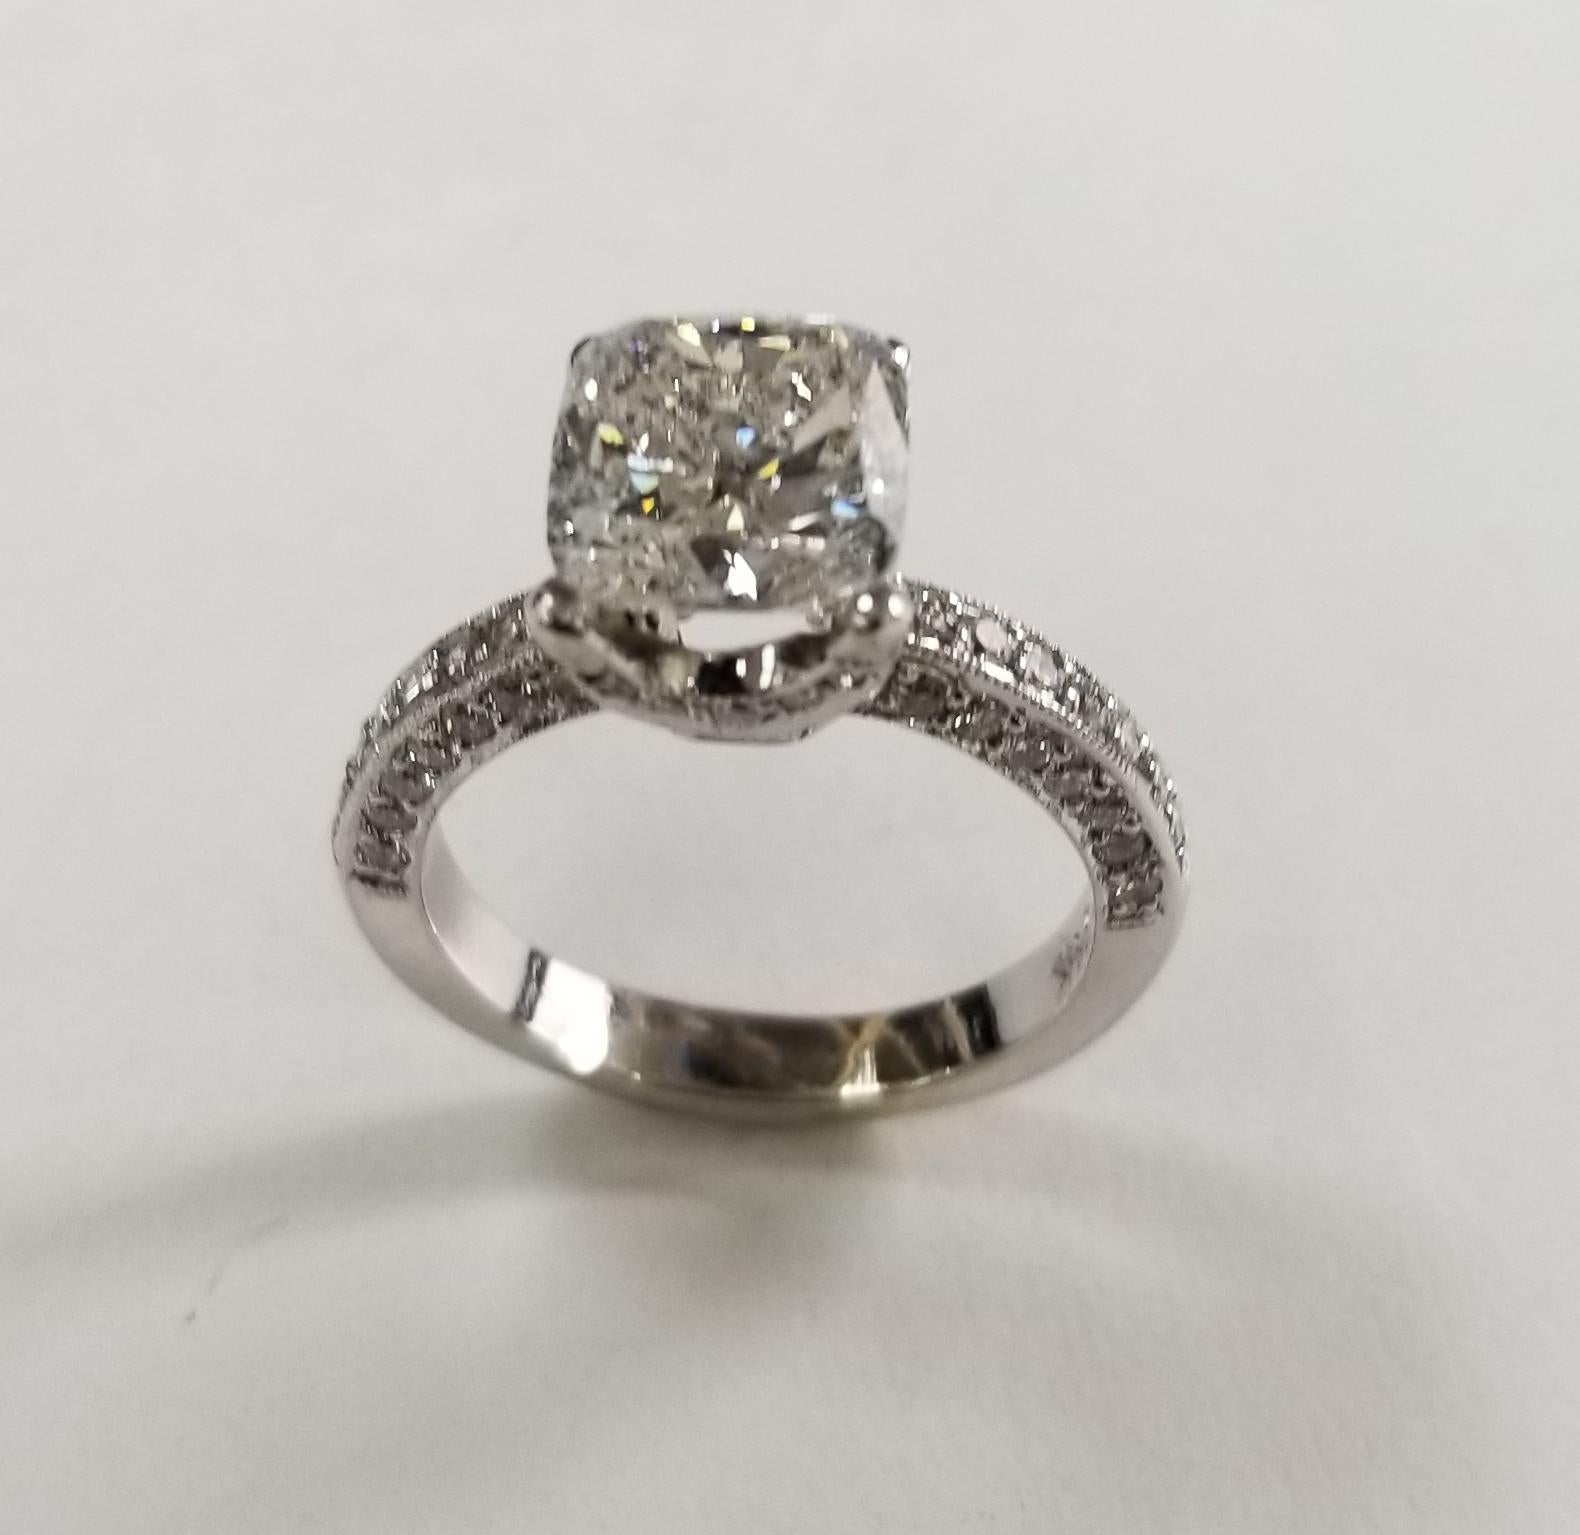 EGL Certified 3.06 carat Cushion cut Diamond E Si3 (US 918748207D) set in a 14k wg pave' setting, containing  60 round full cut diamonds of very fine quality weighing .66pts. ring is a size 6.25 and can be sized to fit for free. 